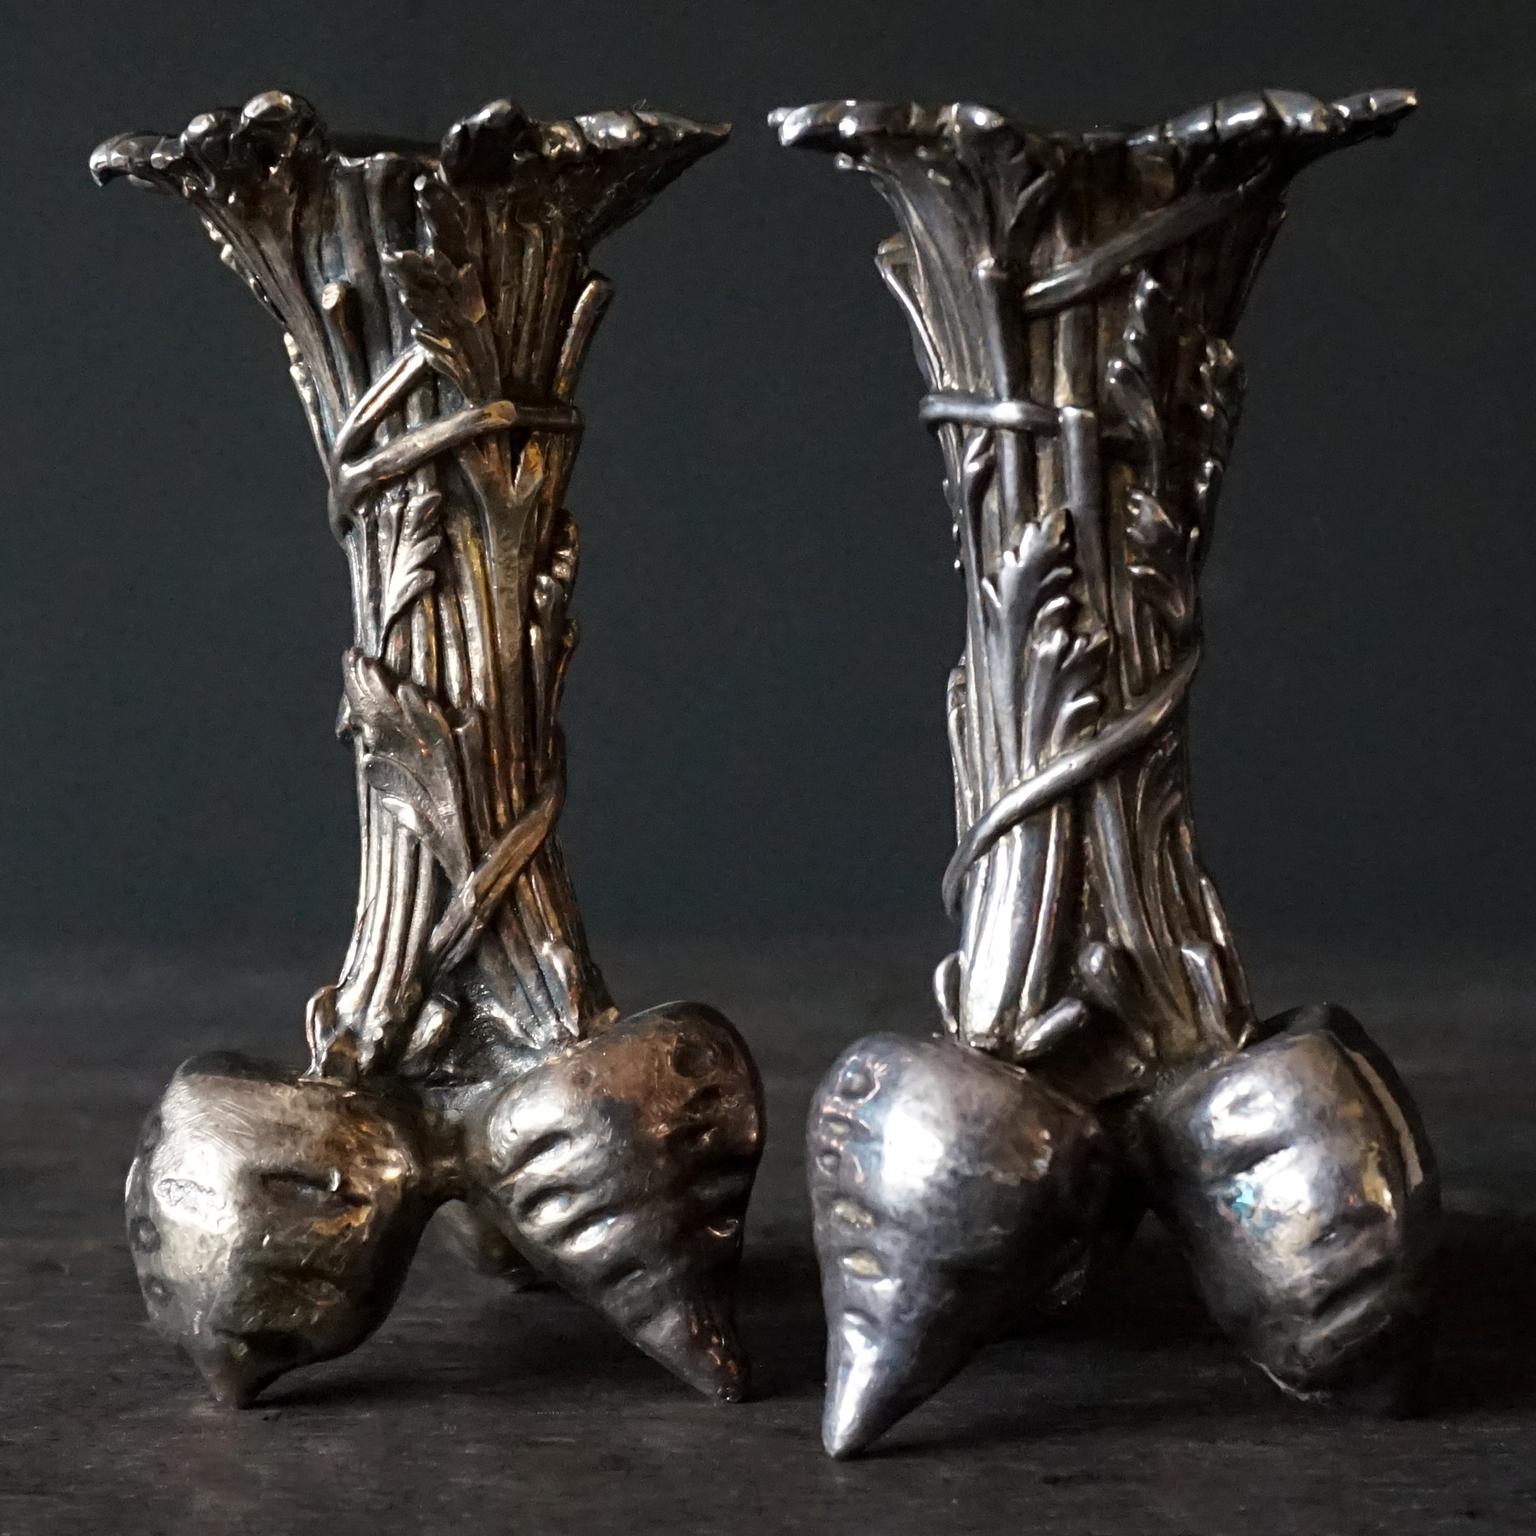 Vintage 1960s Christofle silver plated bronze radish bud vases also know as soliflore or solifleur as you could put one flower in them. But they also could be used as small candle holders.  
I'm not sure if they are little carrots, beets, turnips or